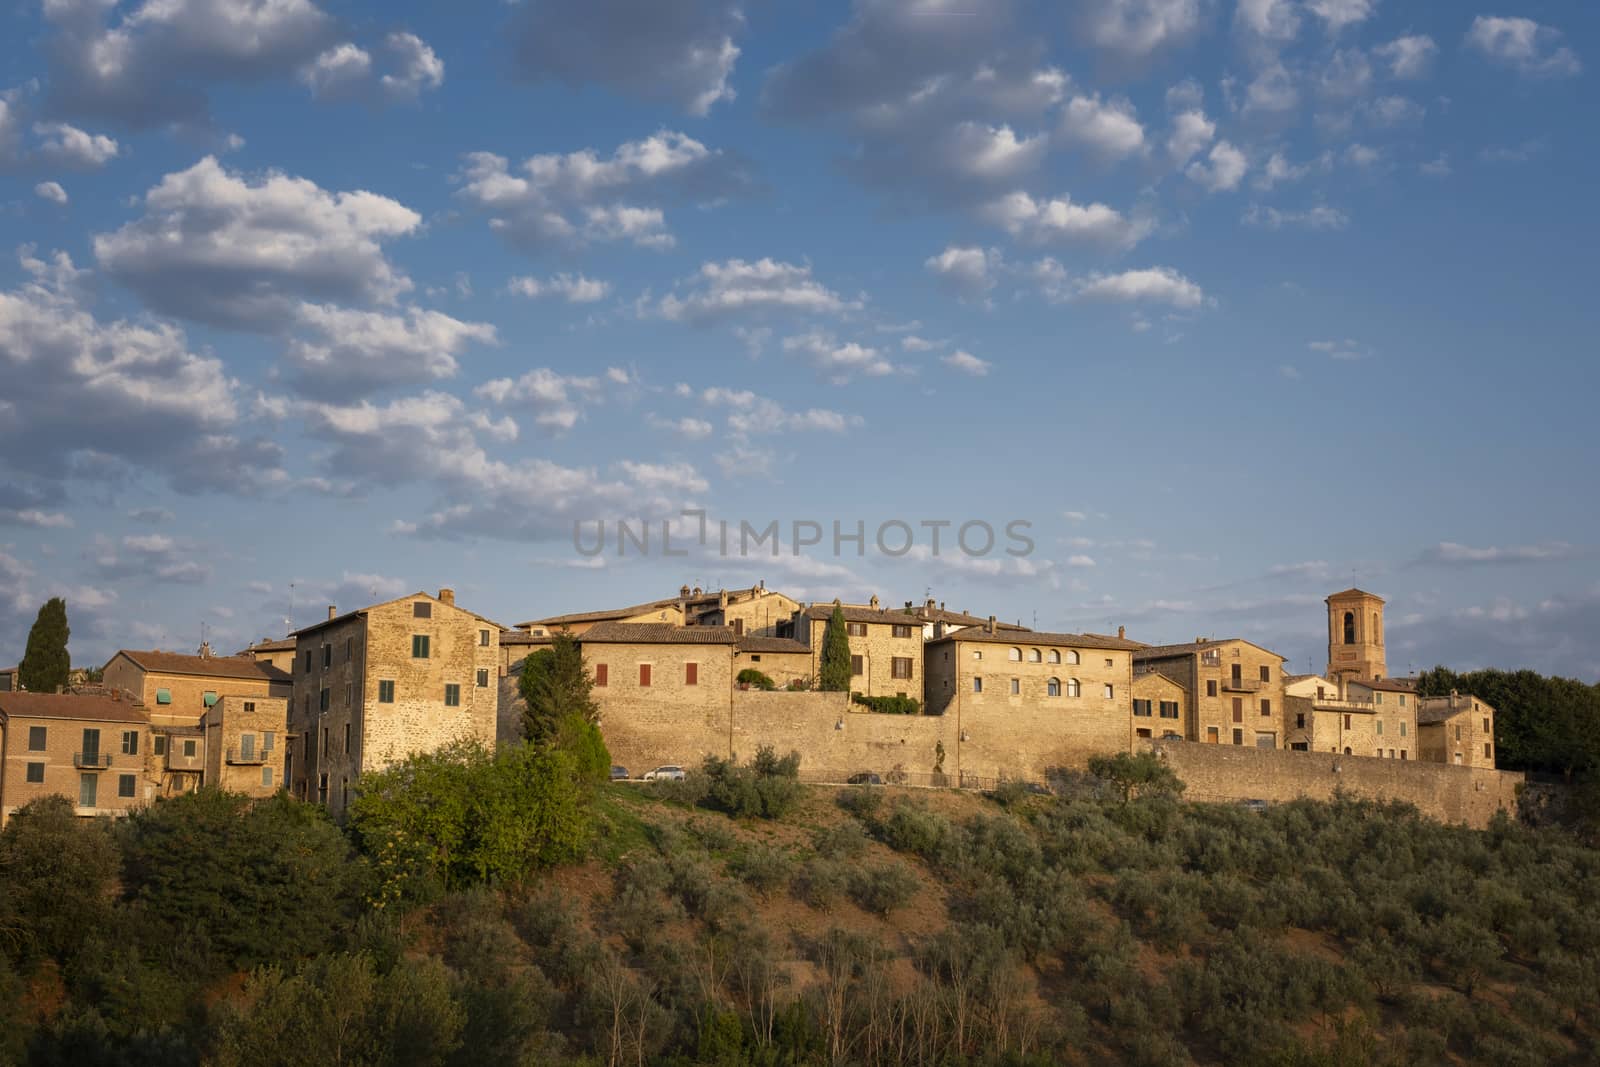 Panoramic view of a historic town in beautiful morning light in Umbria, Italy